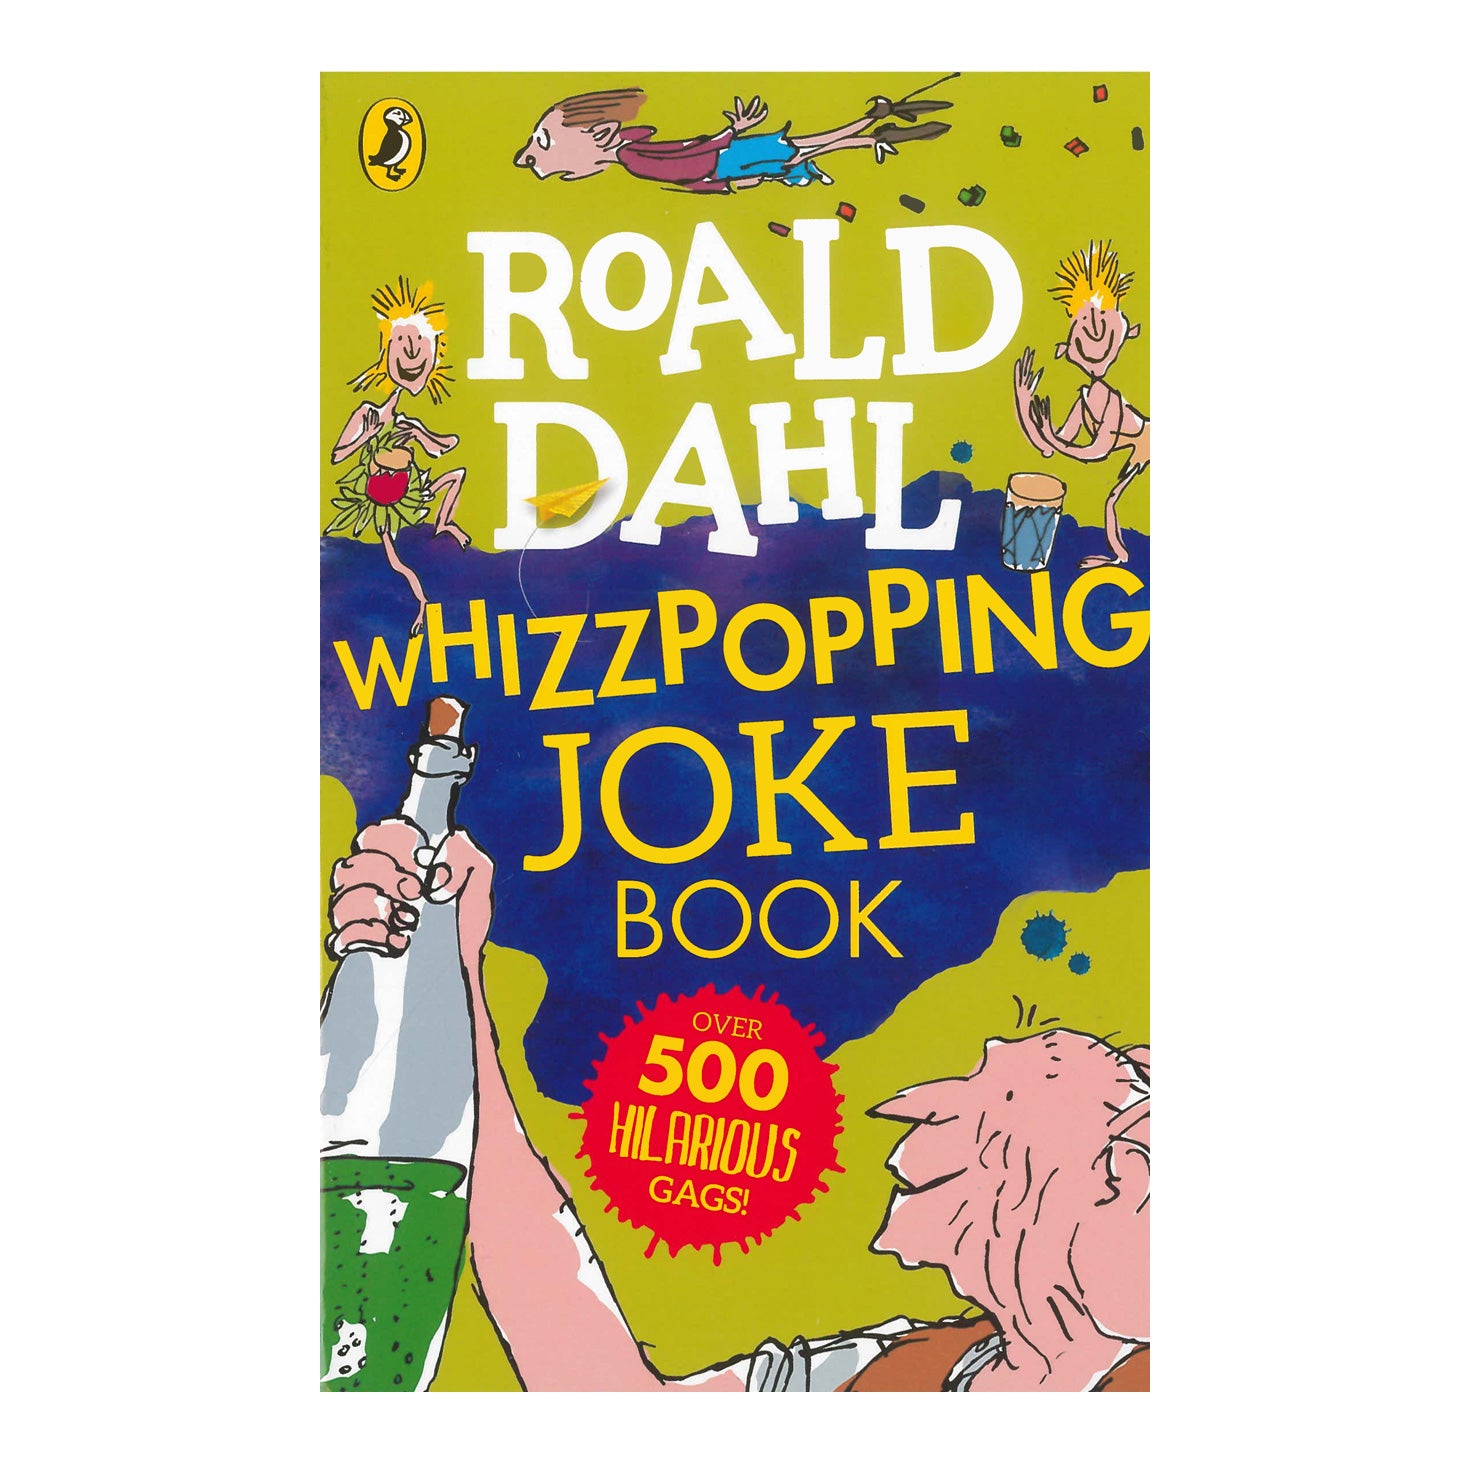 Roald Dahl Whizzpopping Joke Book inspired by Roald Dahl and illustrated by Quentin Blake